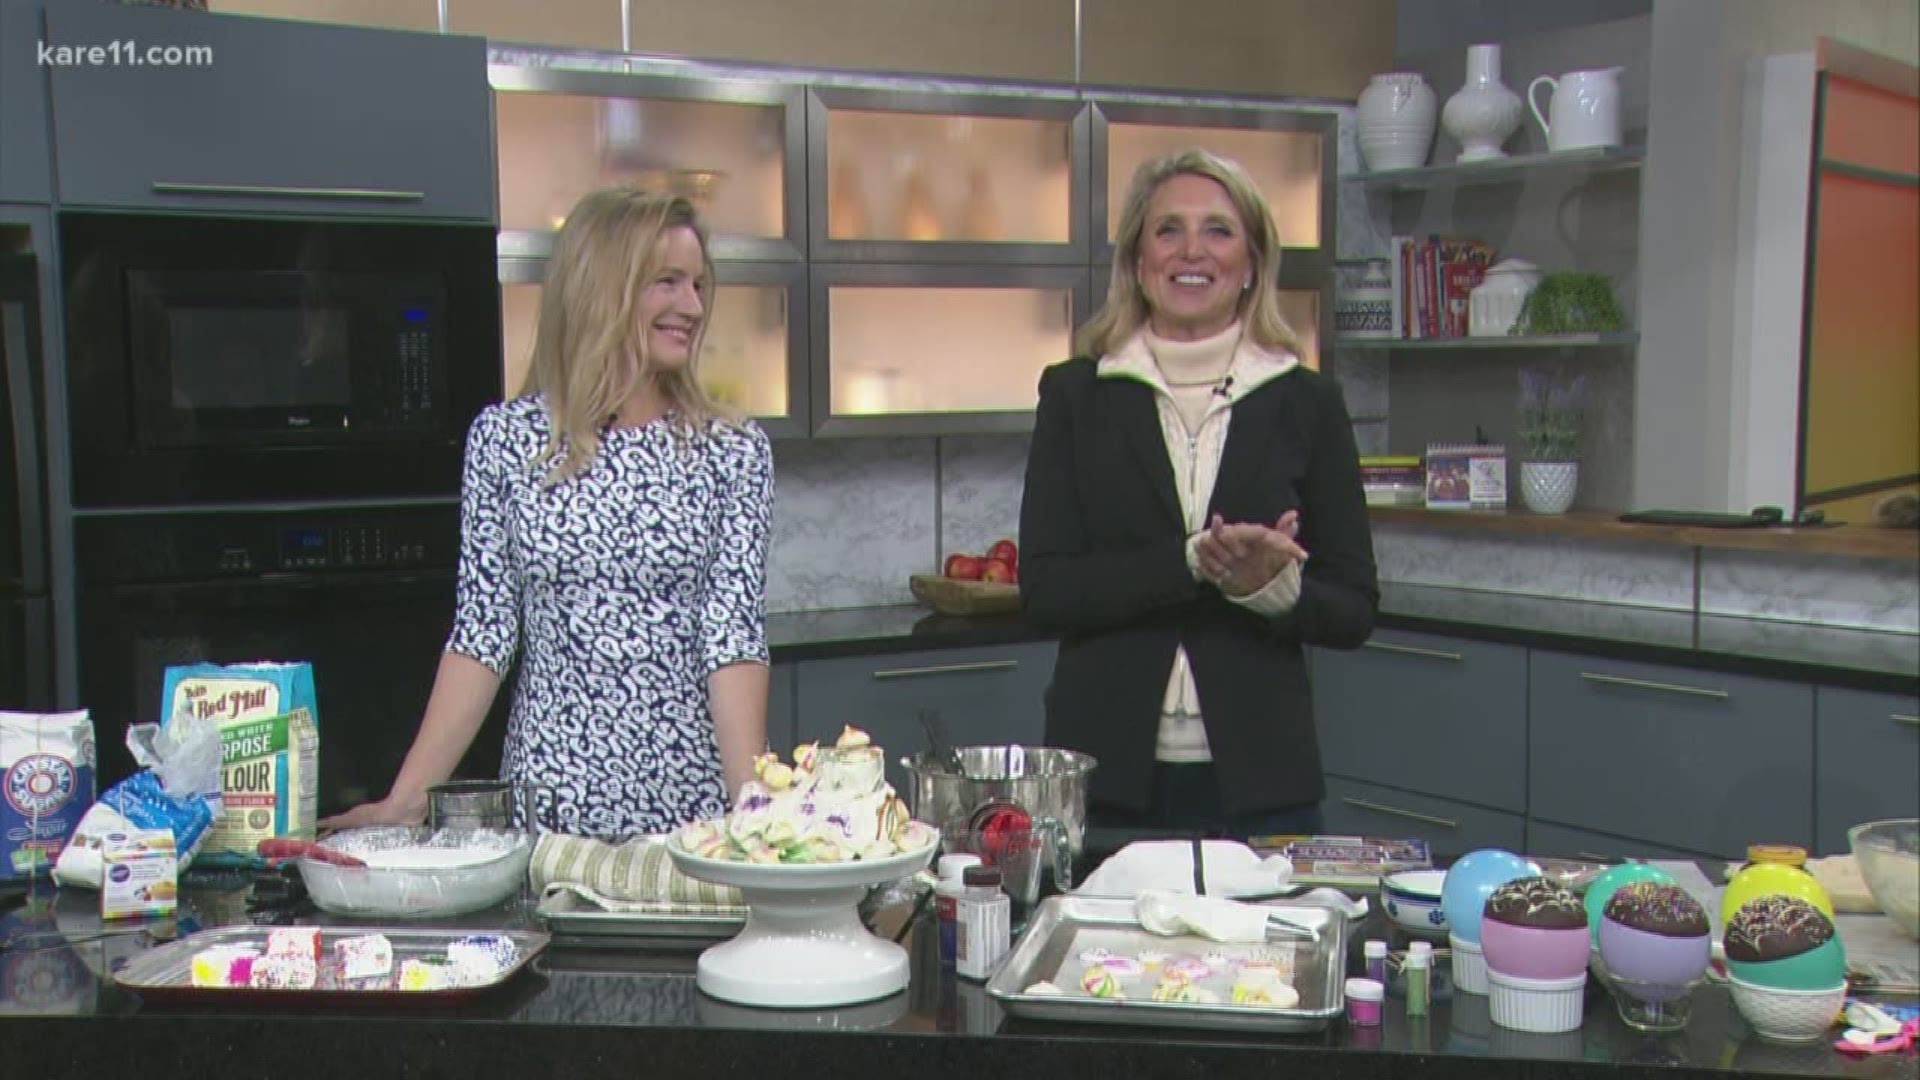 Liz Heinecke is here to share here meringue mushroom recipe, and discuss her kids science cookbook, "Kitchen Science Lab for Kids - Edible Edition."